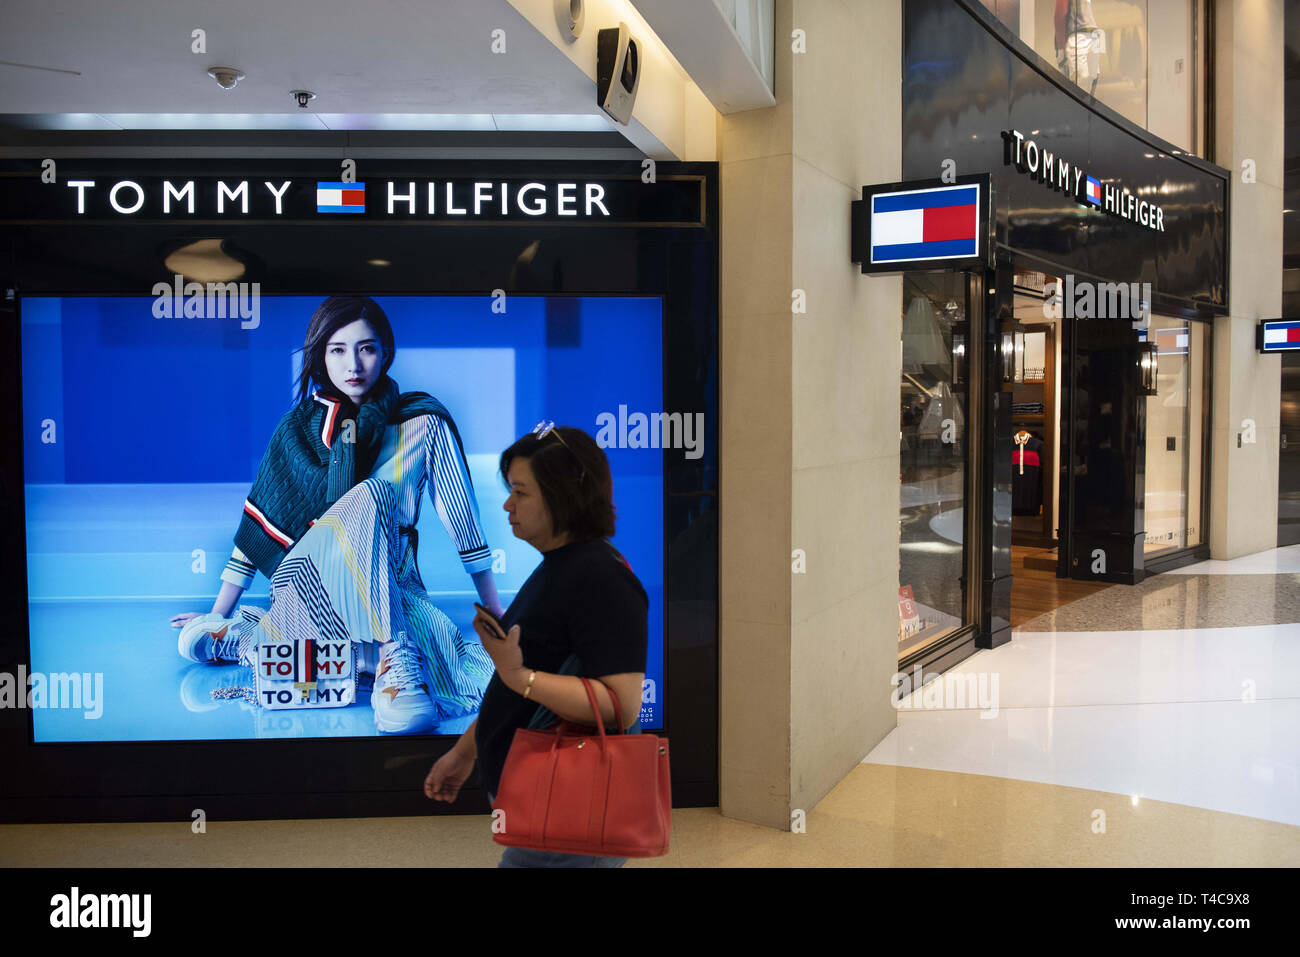 Tommy Hilfiger Outlet in Hong Kong Editorial Photography - Image